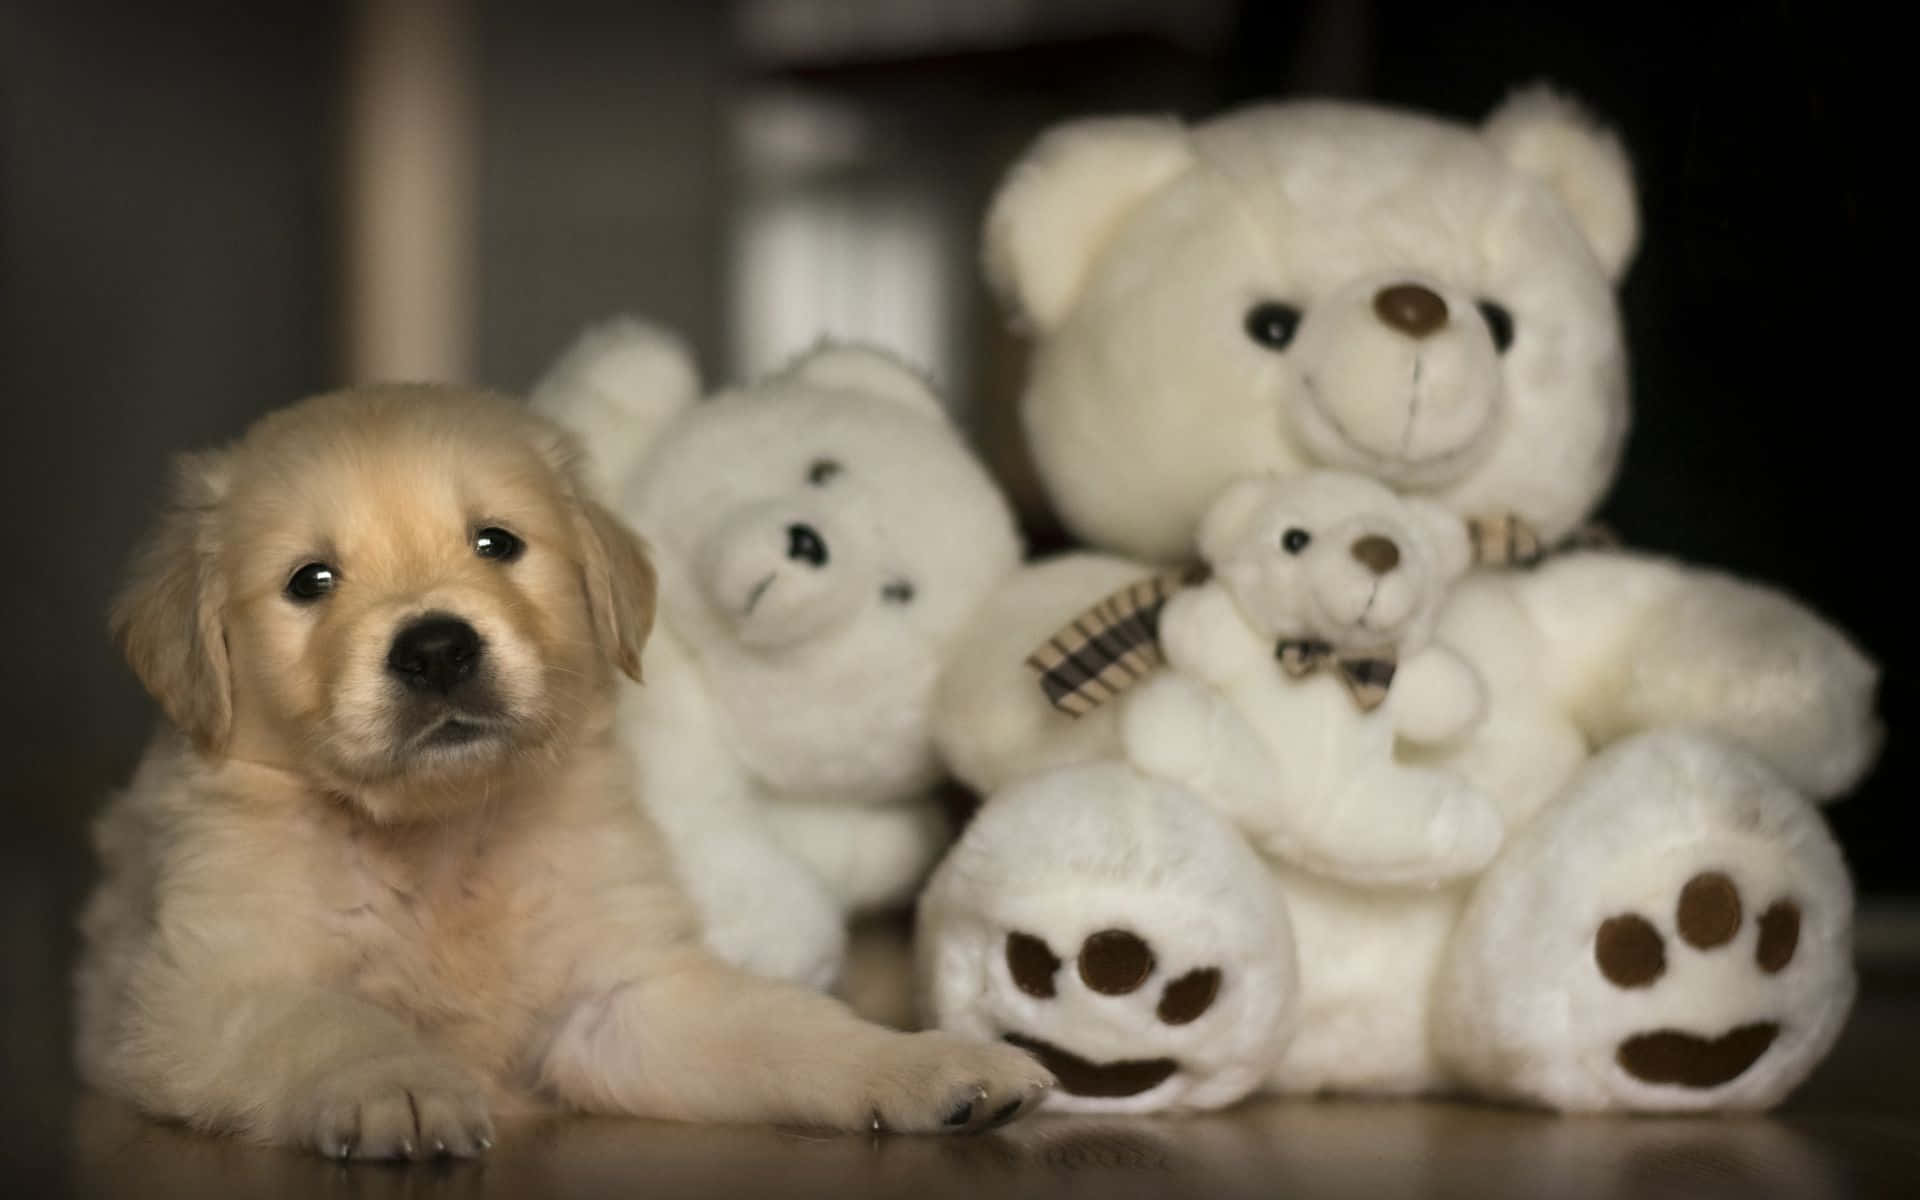 A Puppy Is Sitting Next To A Group Of Teddy Bears